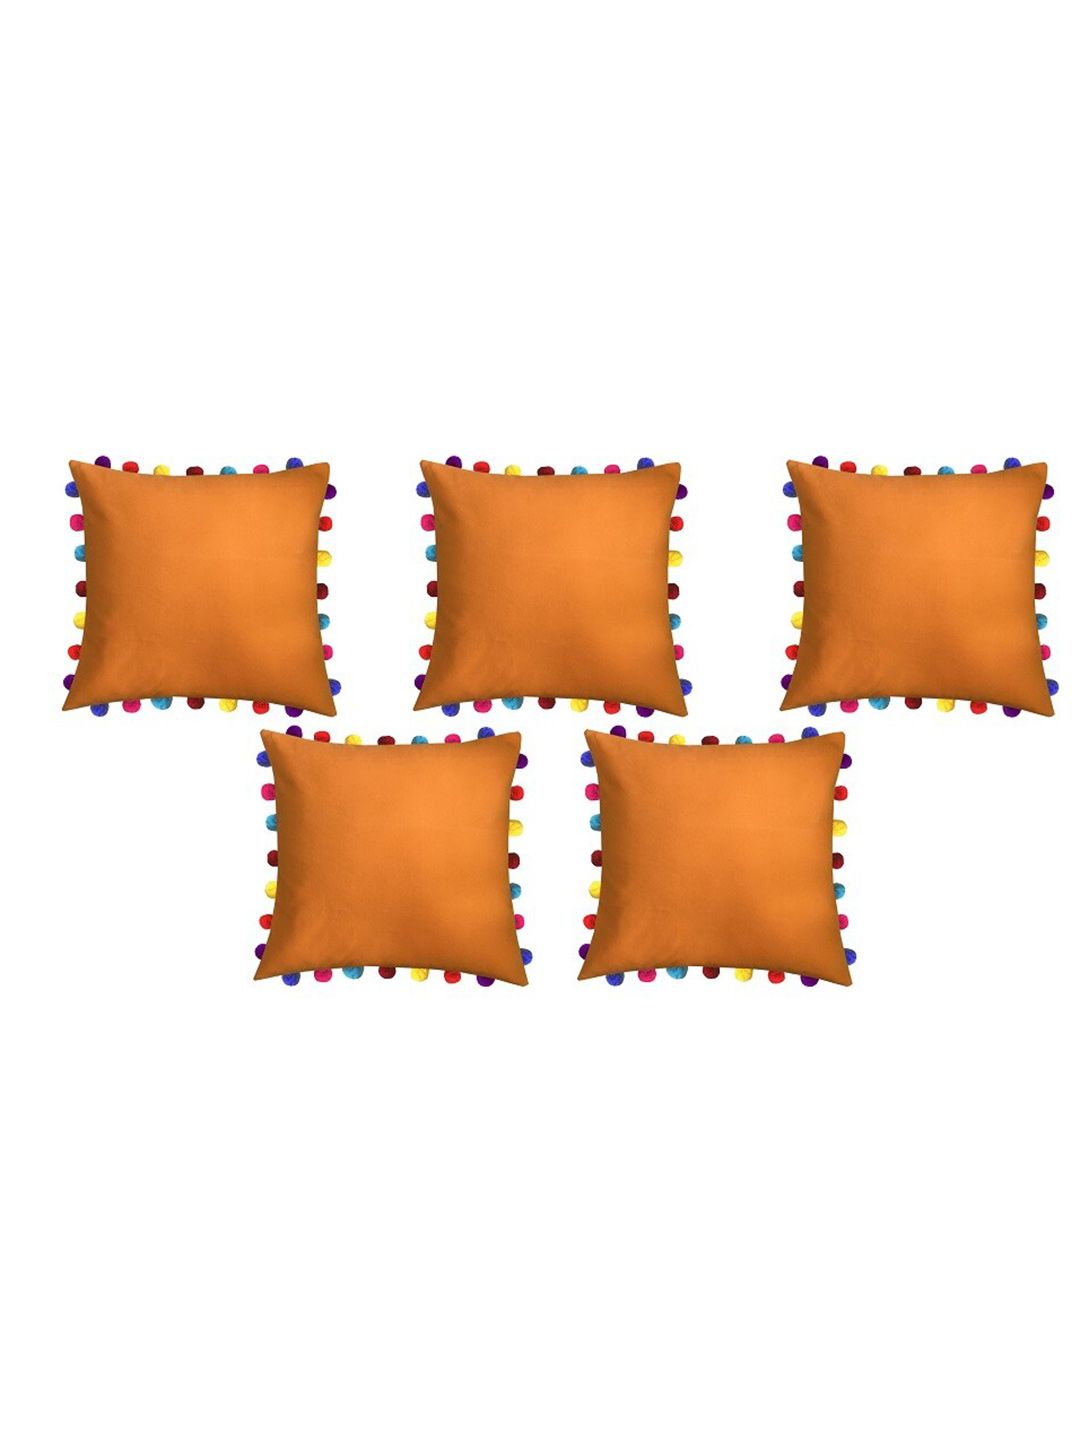 Lushomes Set of 5 Orange Pure Cotton Square Cushion Covers With Colourful Pom Poms Price in India